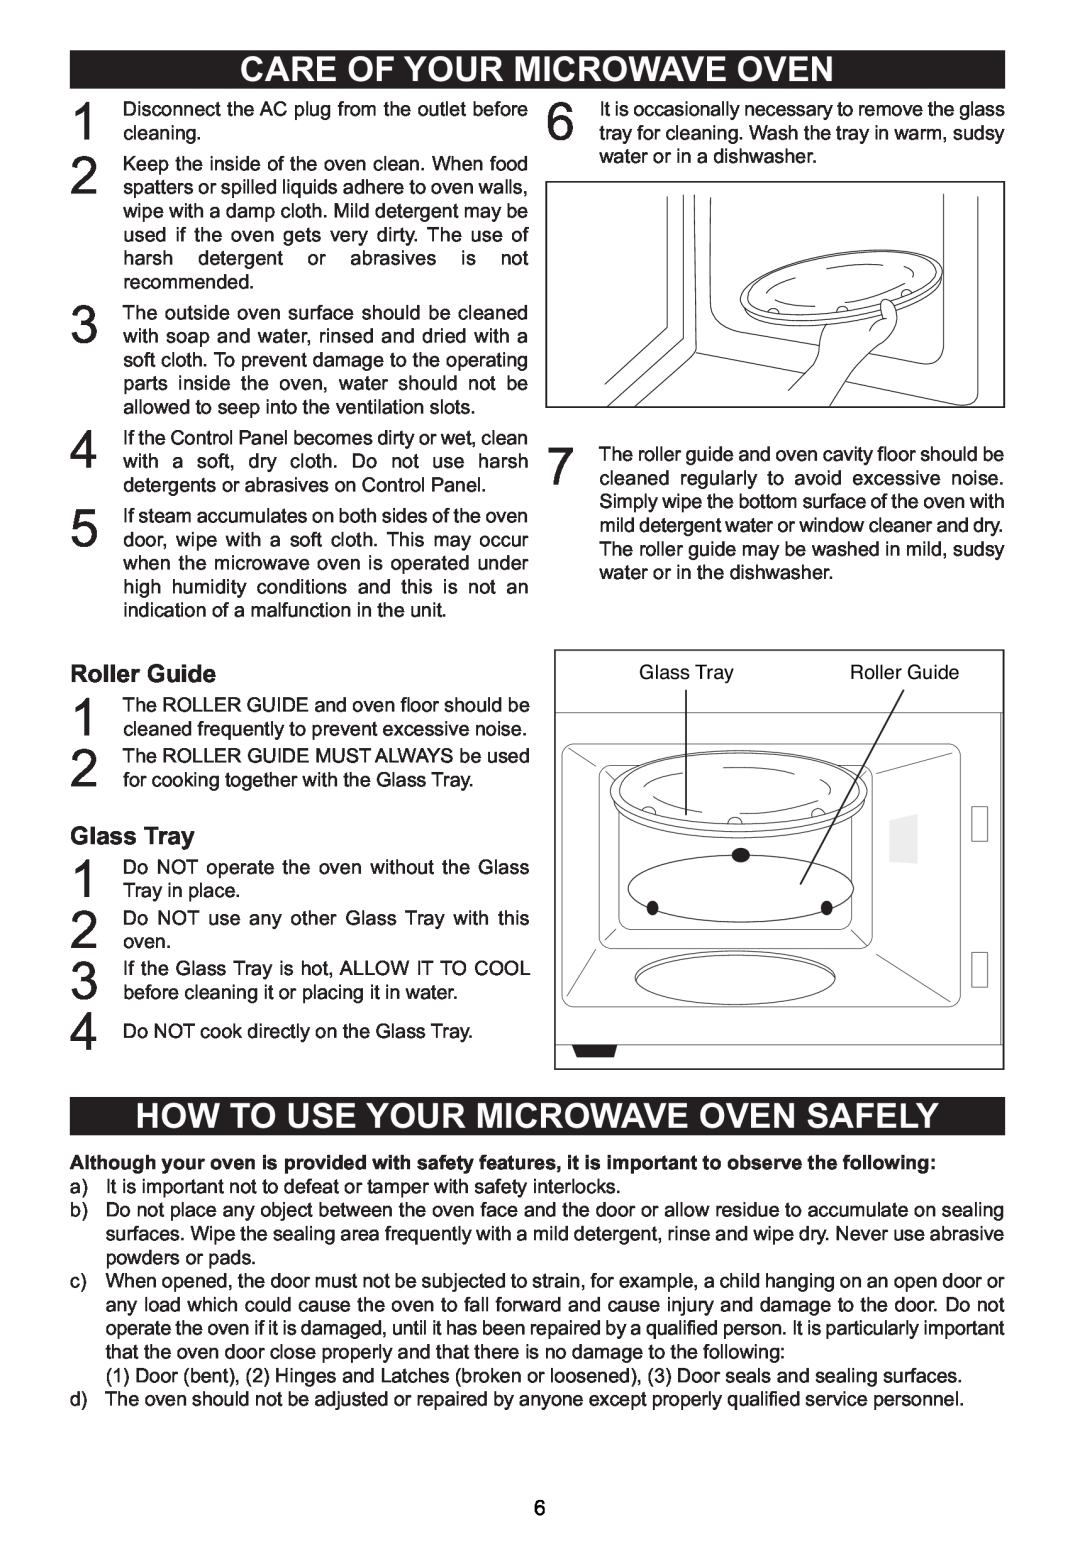 Emerson MW7302B, MW7302W Care Of Your Microwave Oven, How To Use Your Microwave Oven Safely, Roller Guide, Glass Tray 